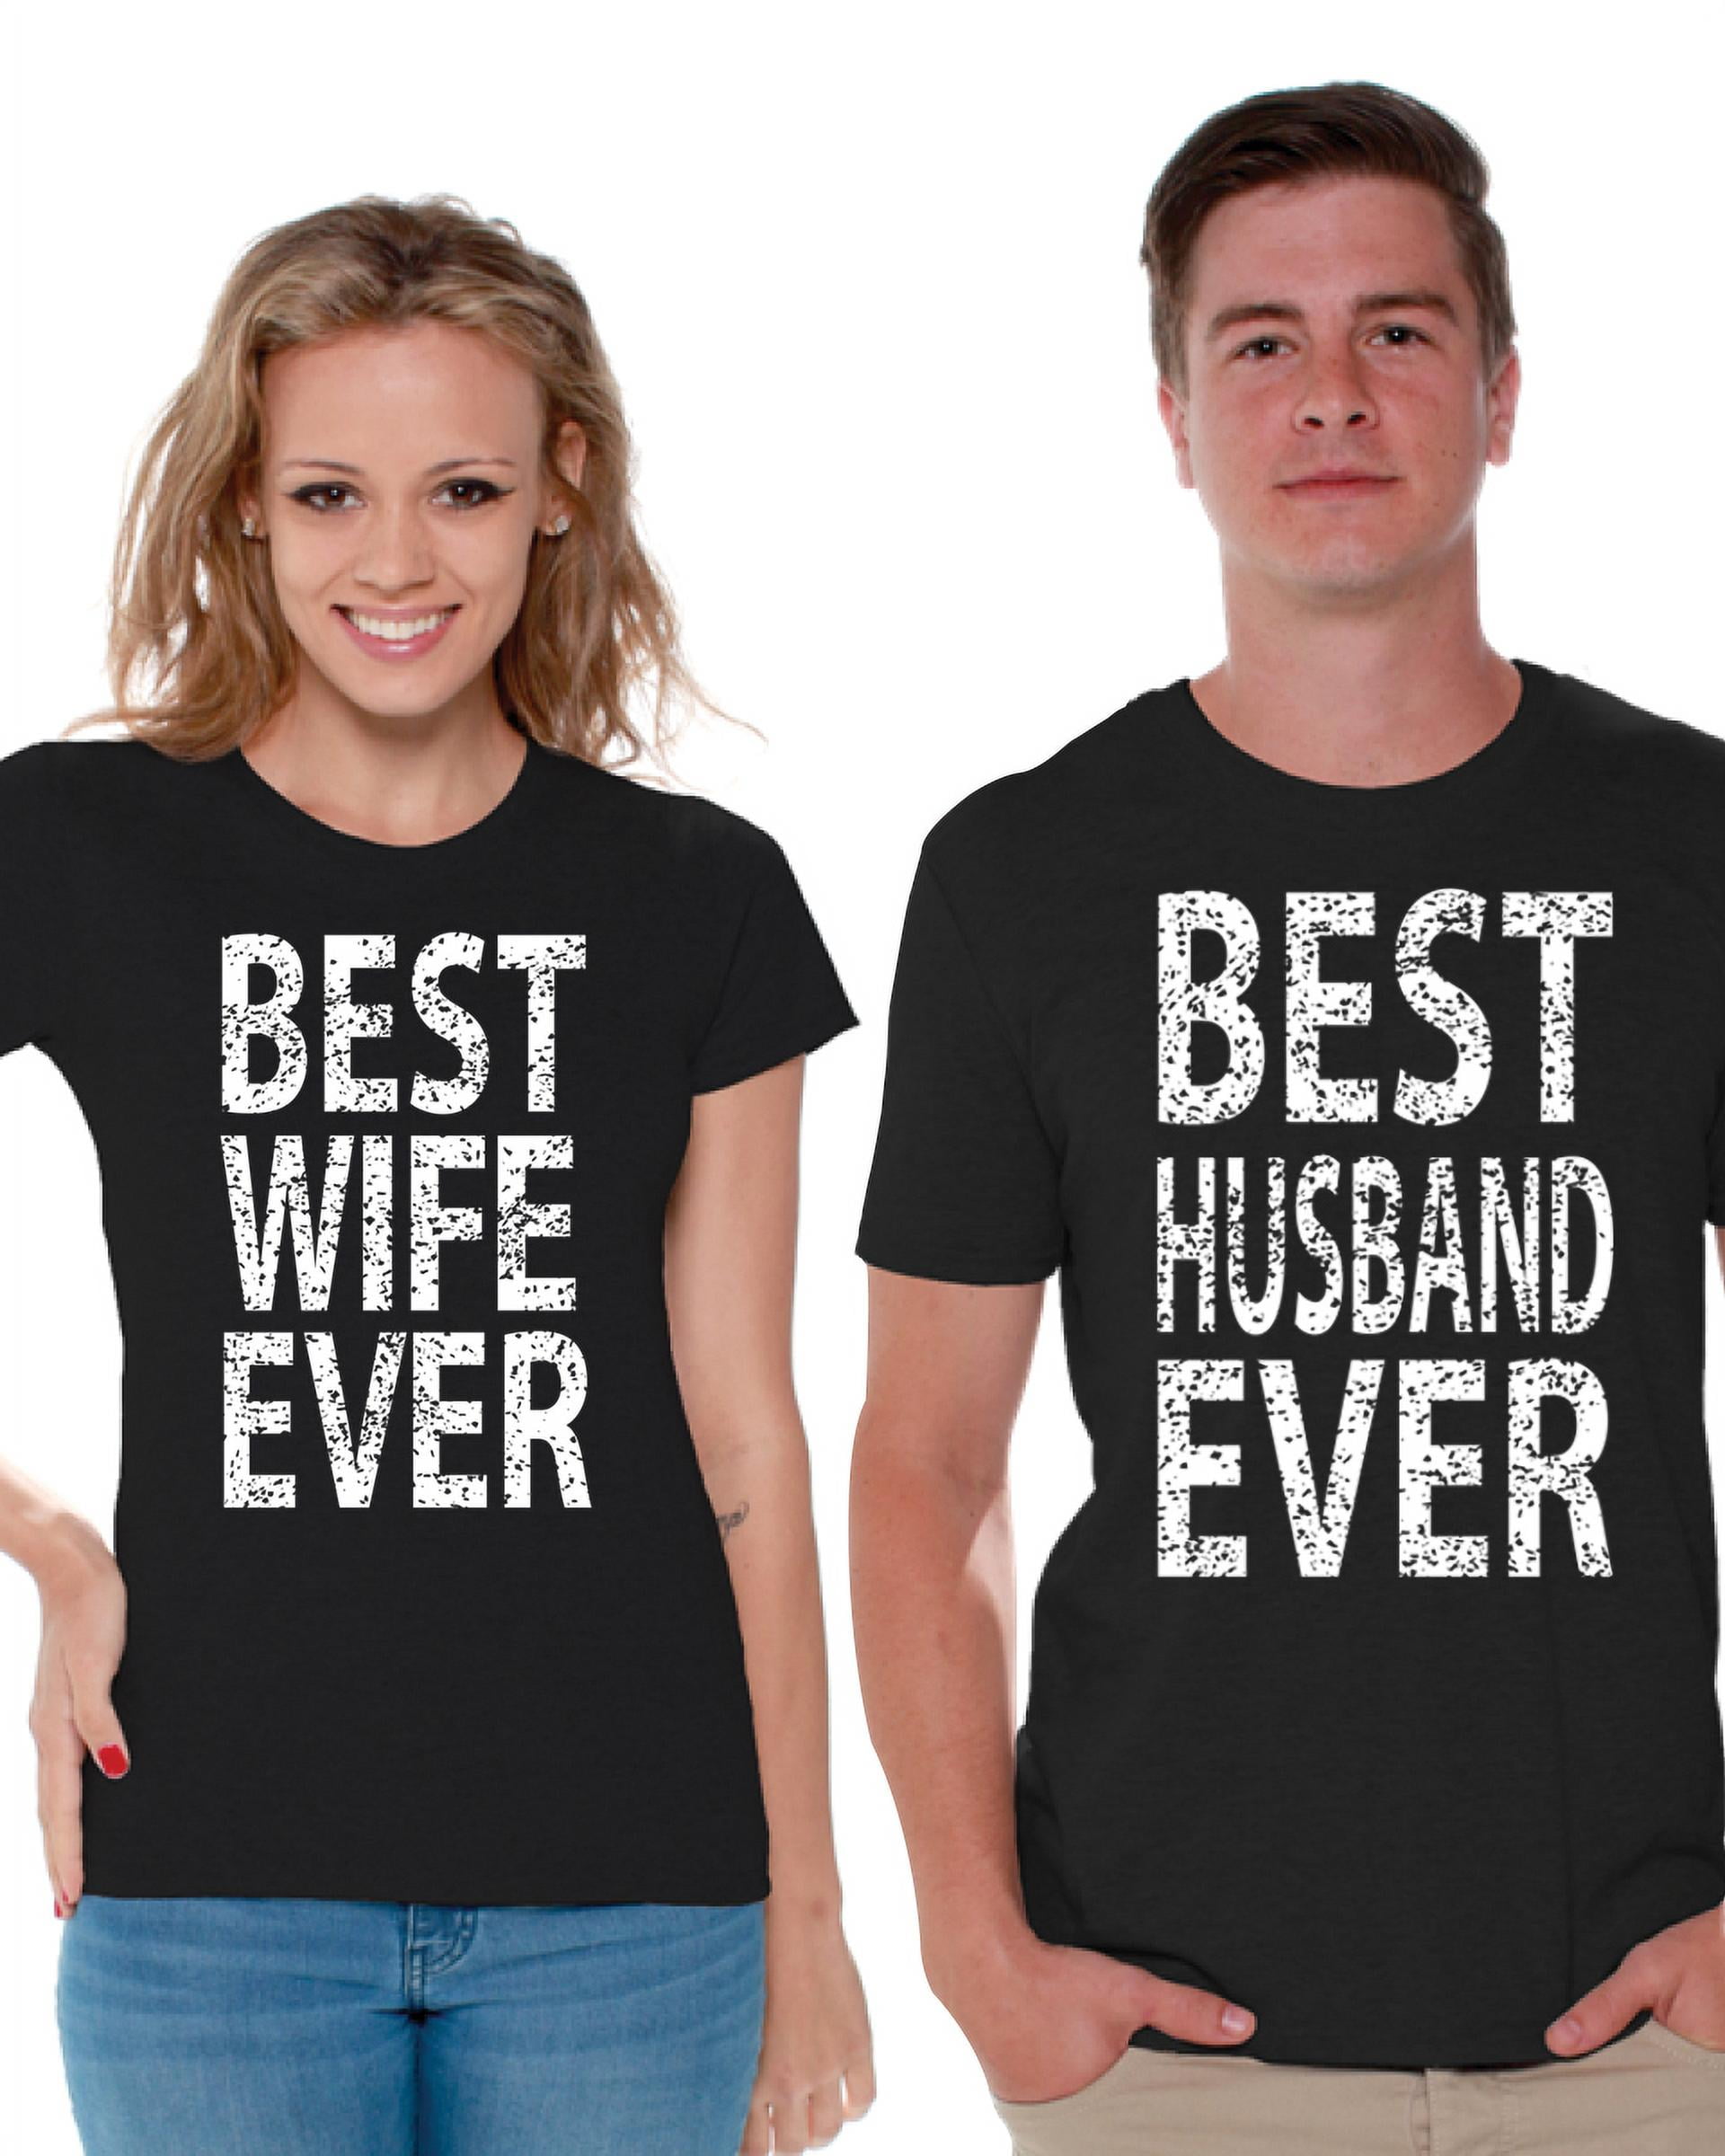 Awkward Styles Husband Wife Matching Couple Shirts Best Ever Shirt Valentines Gift Couples Cute Anniversary Gifts 8b1f6278 4725 498e b202 aa5b015a9bf8.e14fd89a6f7a4704cc48e682a337f1b0